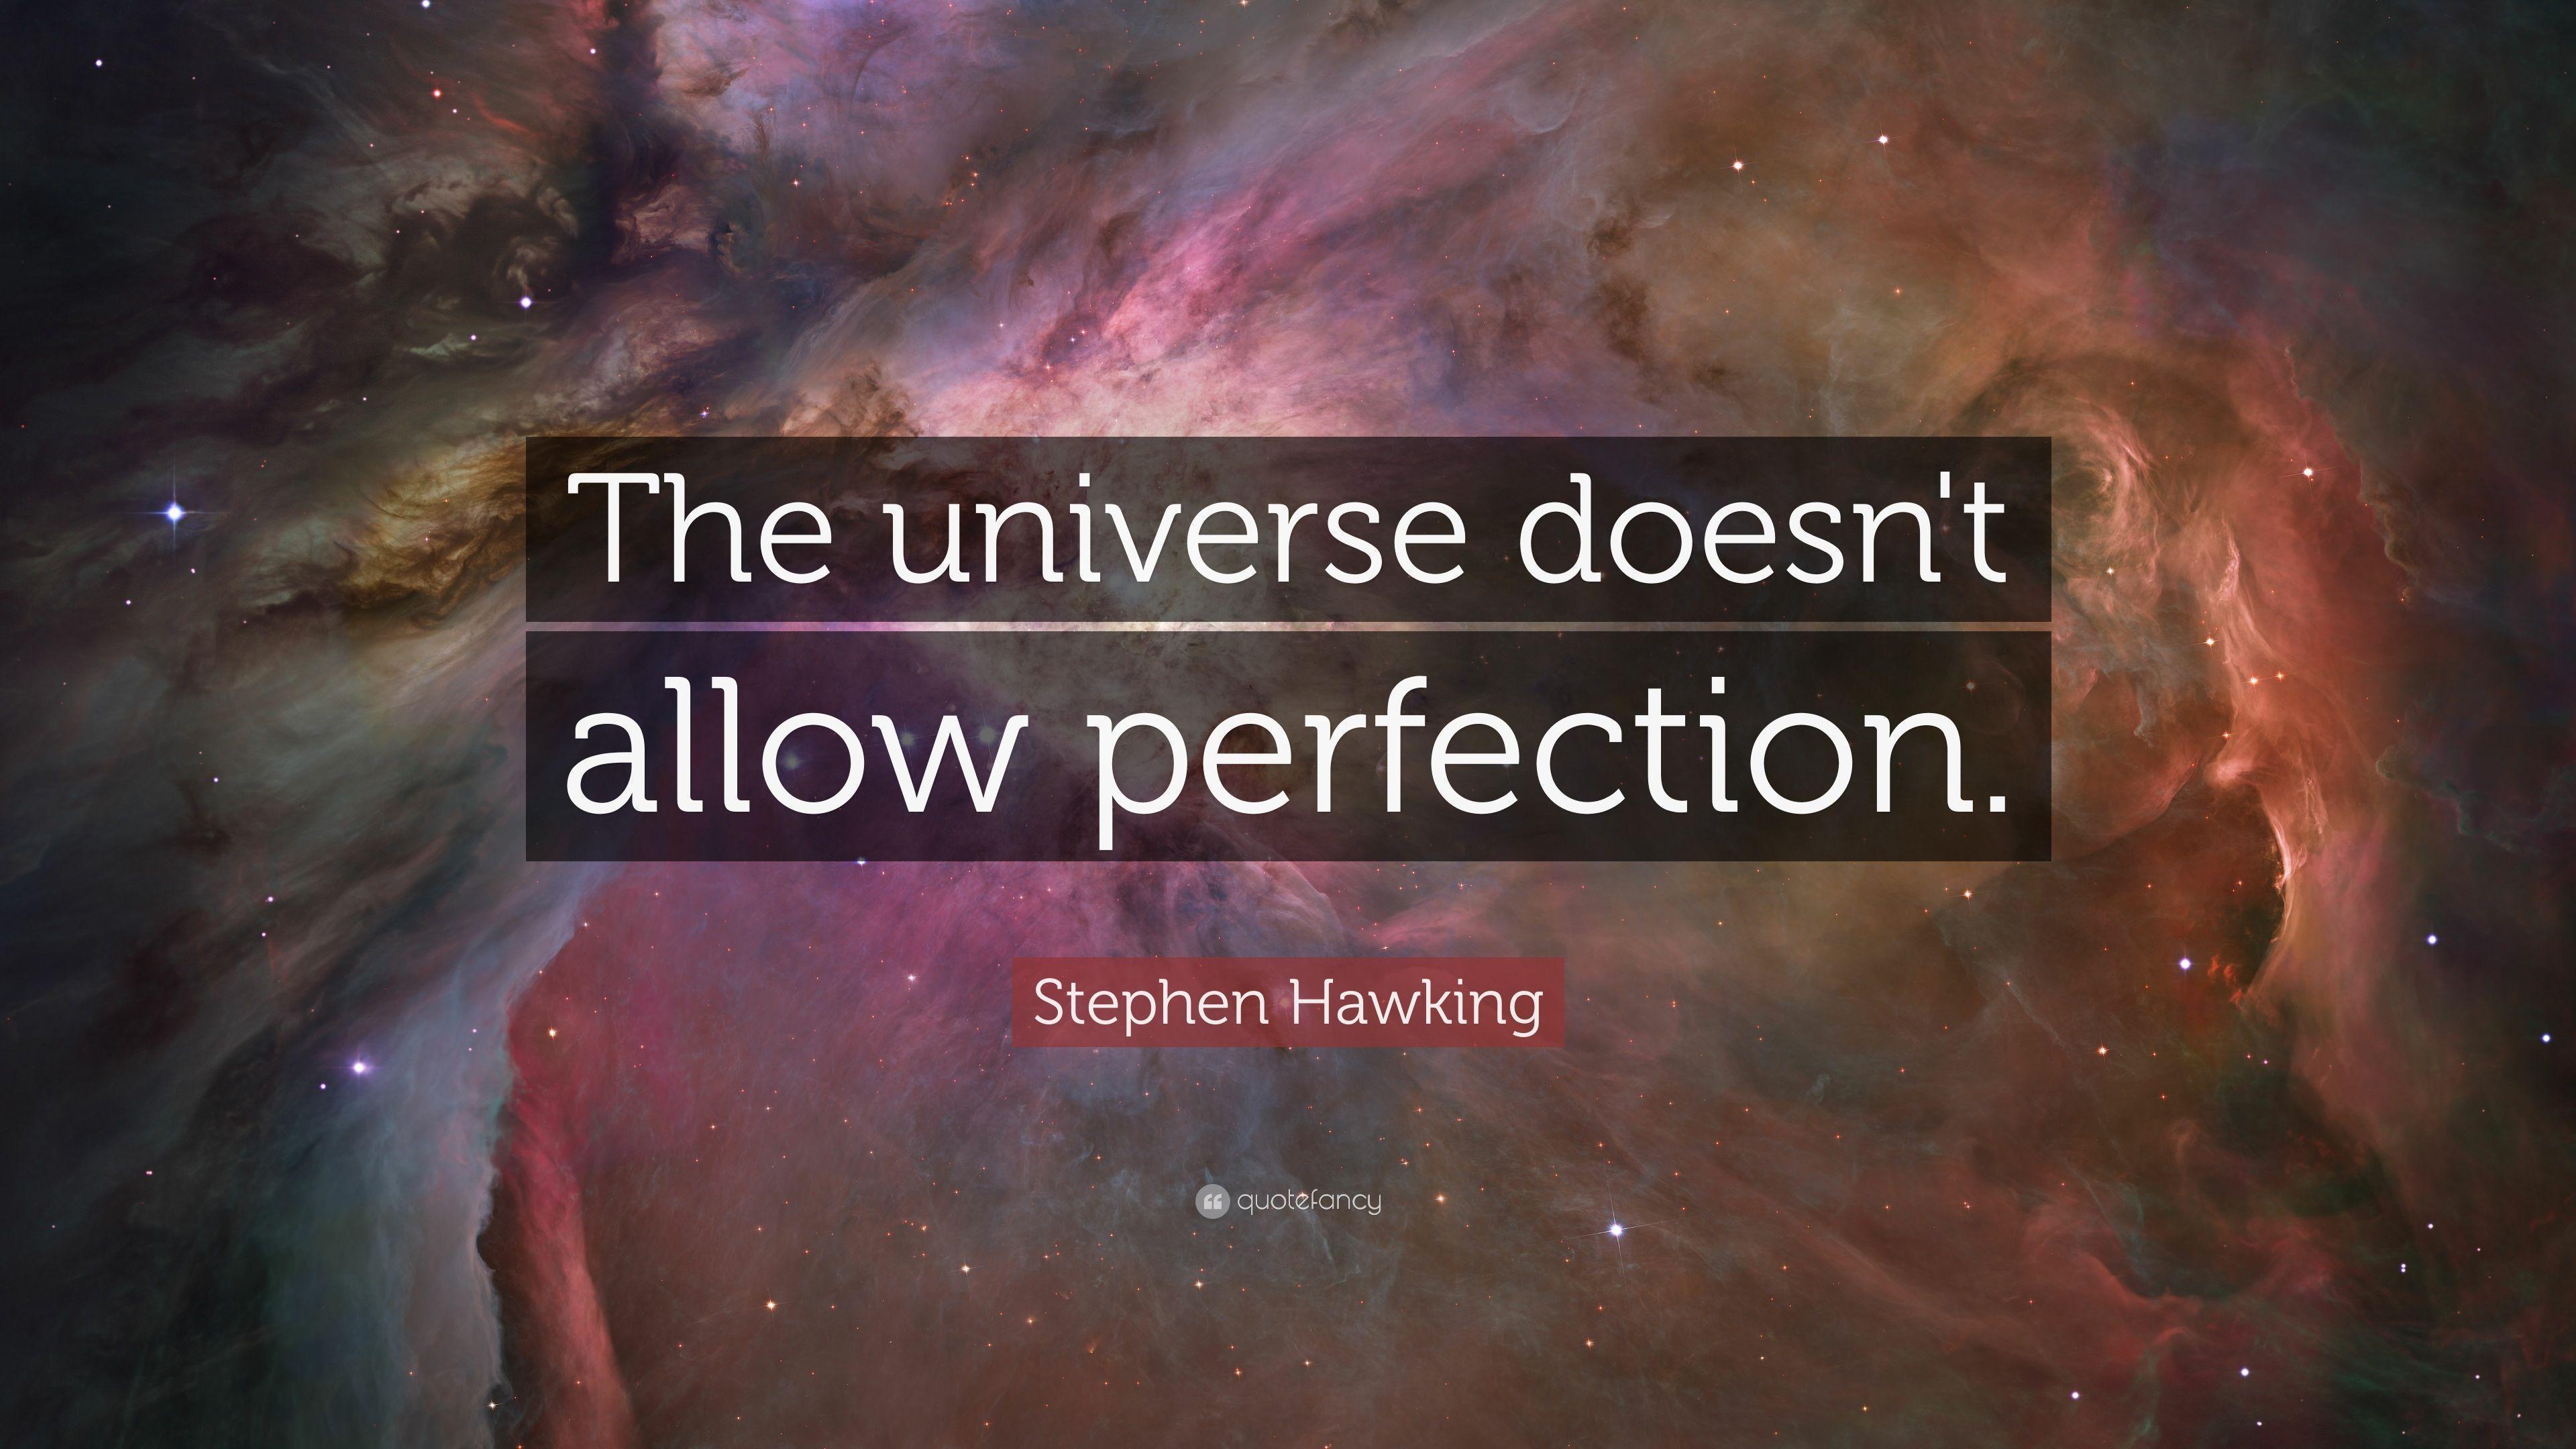 Stephen Hawking Quote: “The universe doesn't allow perfection